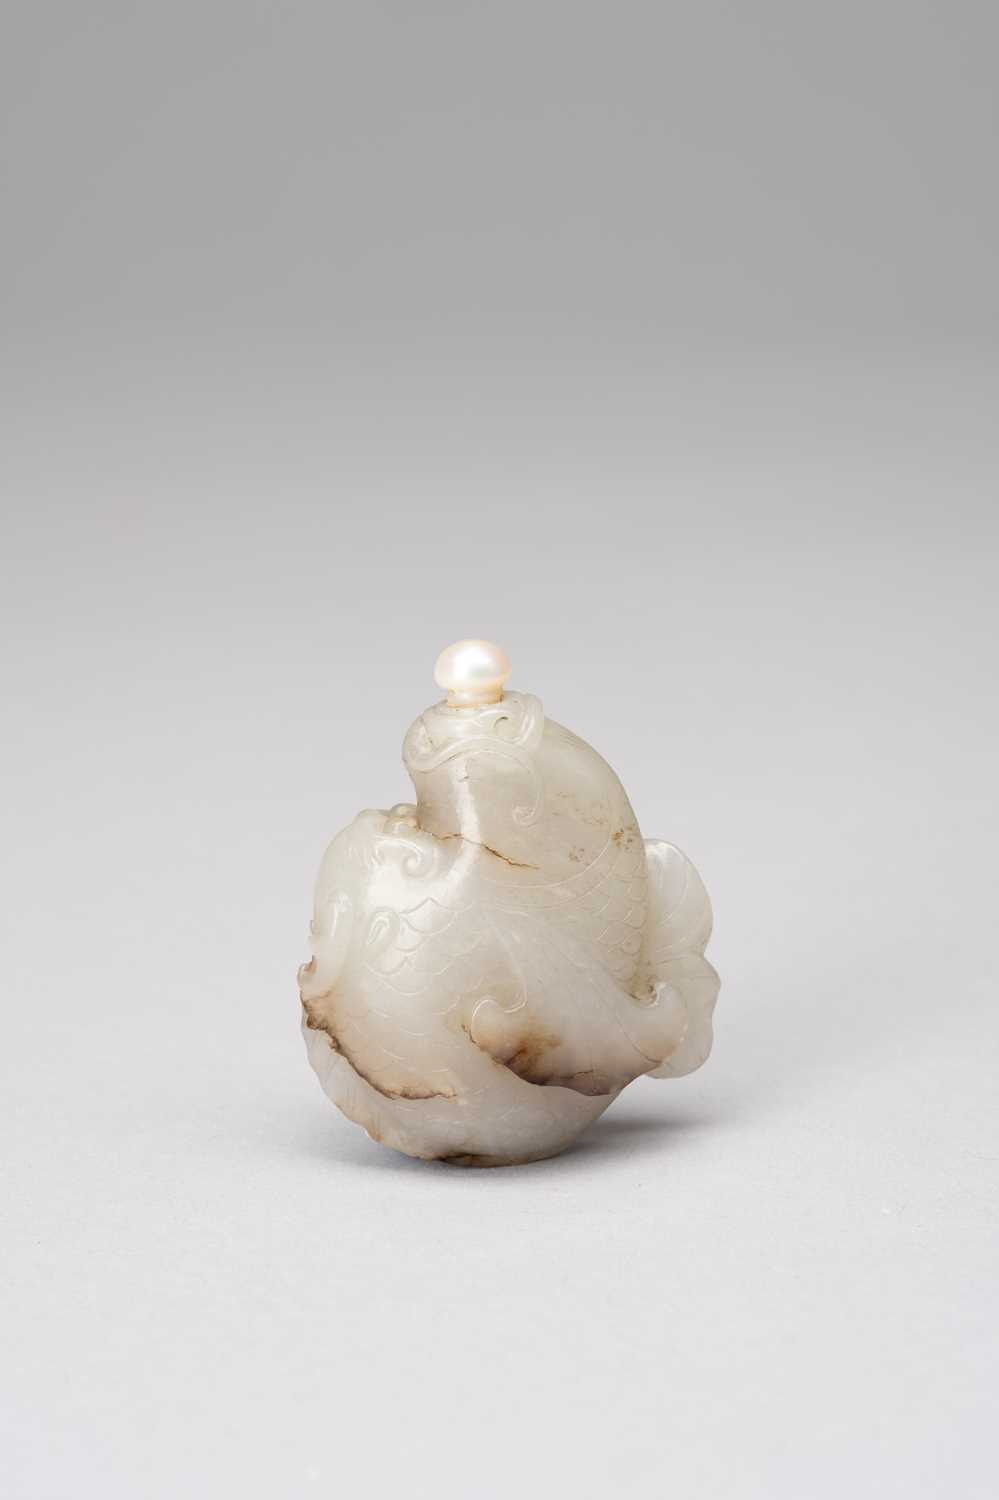 A SMALL CHINESE JADE SNUFF BOTTLEQIANLONG 1736-95Attributed to the Beijing Palace workshops, the